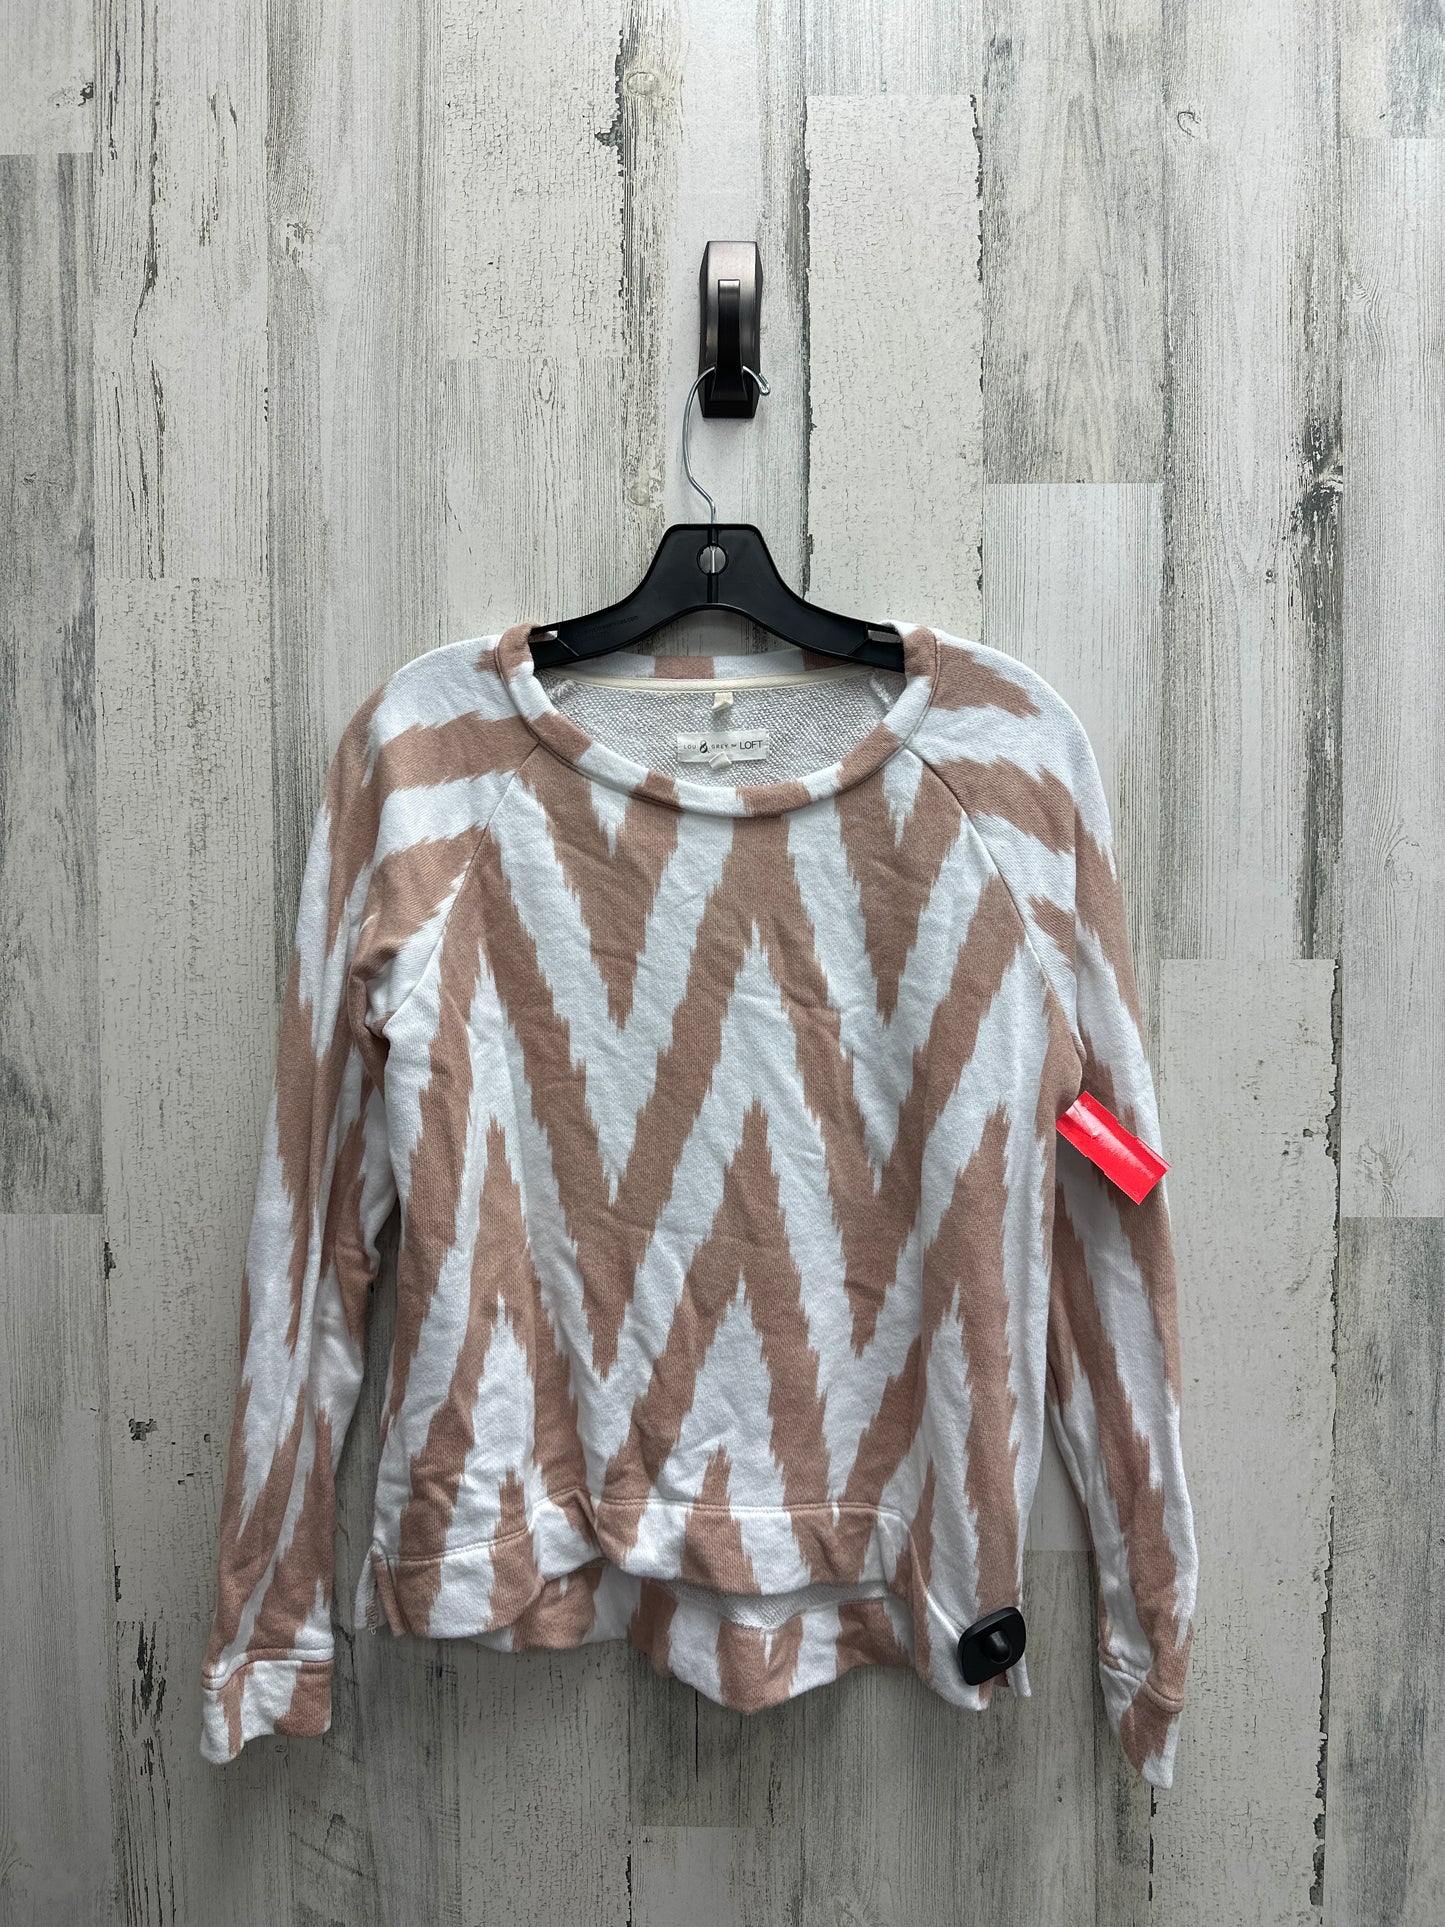 Sweater By Lou And Grey  Size: S